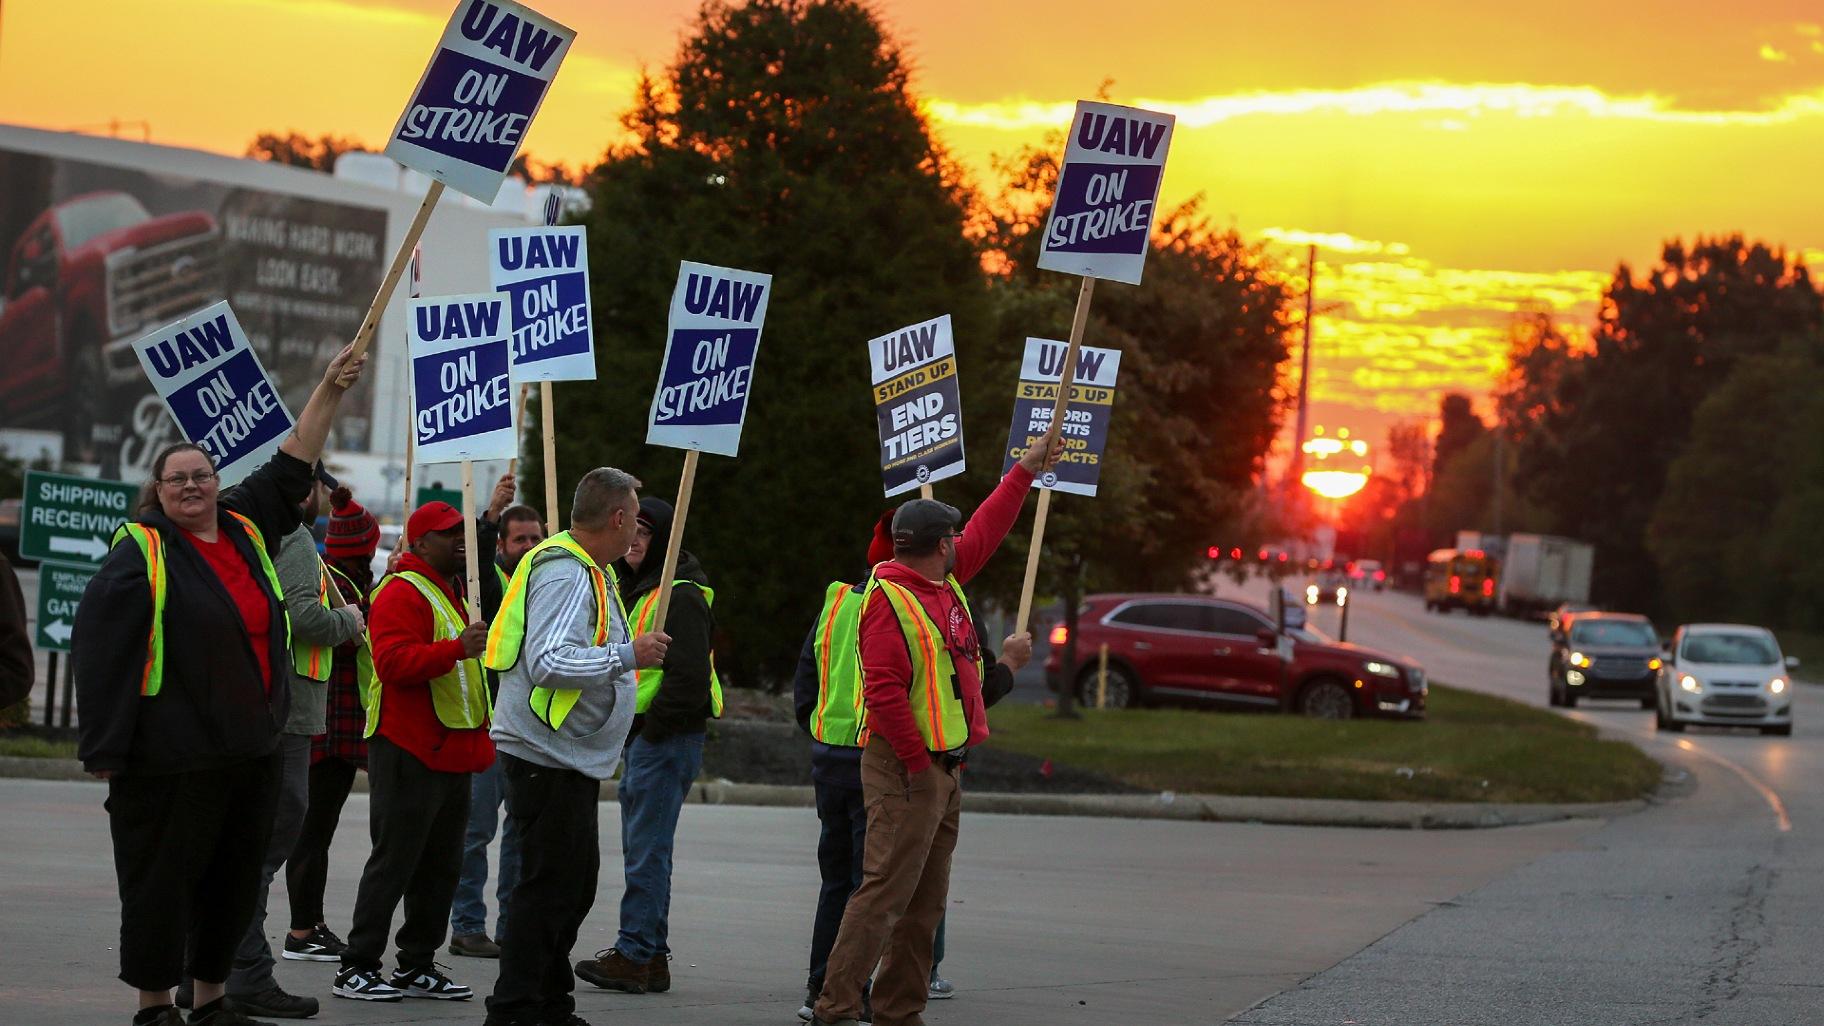 File - UAW local 862 members strike outside of Ford's Kentucky Truck Plant in Louisville, Ky. on Oct. 12, 2023. (Michael Clevenger / Courier Journal via AP, File)